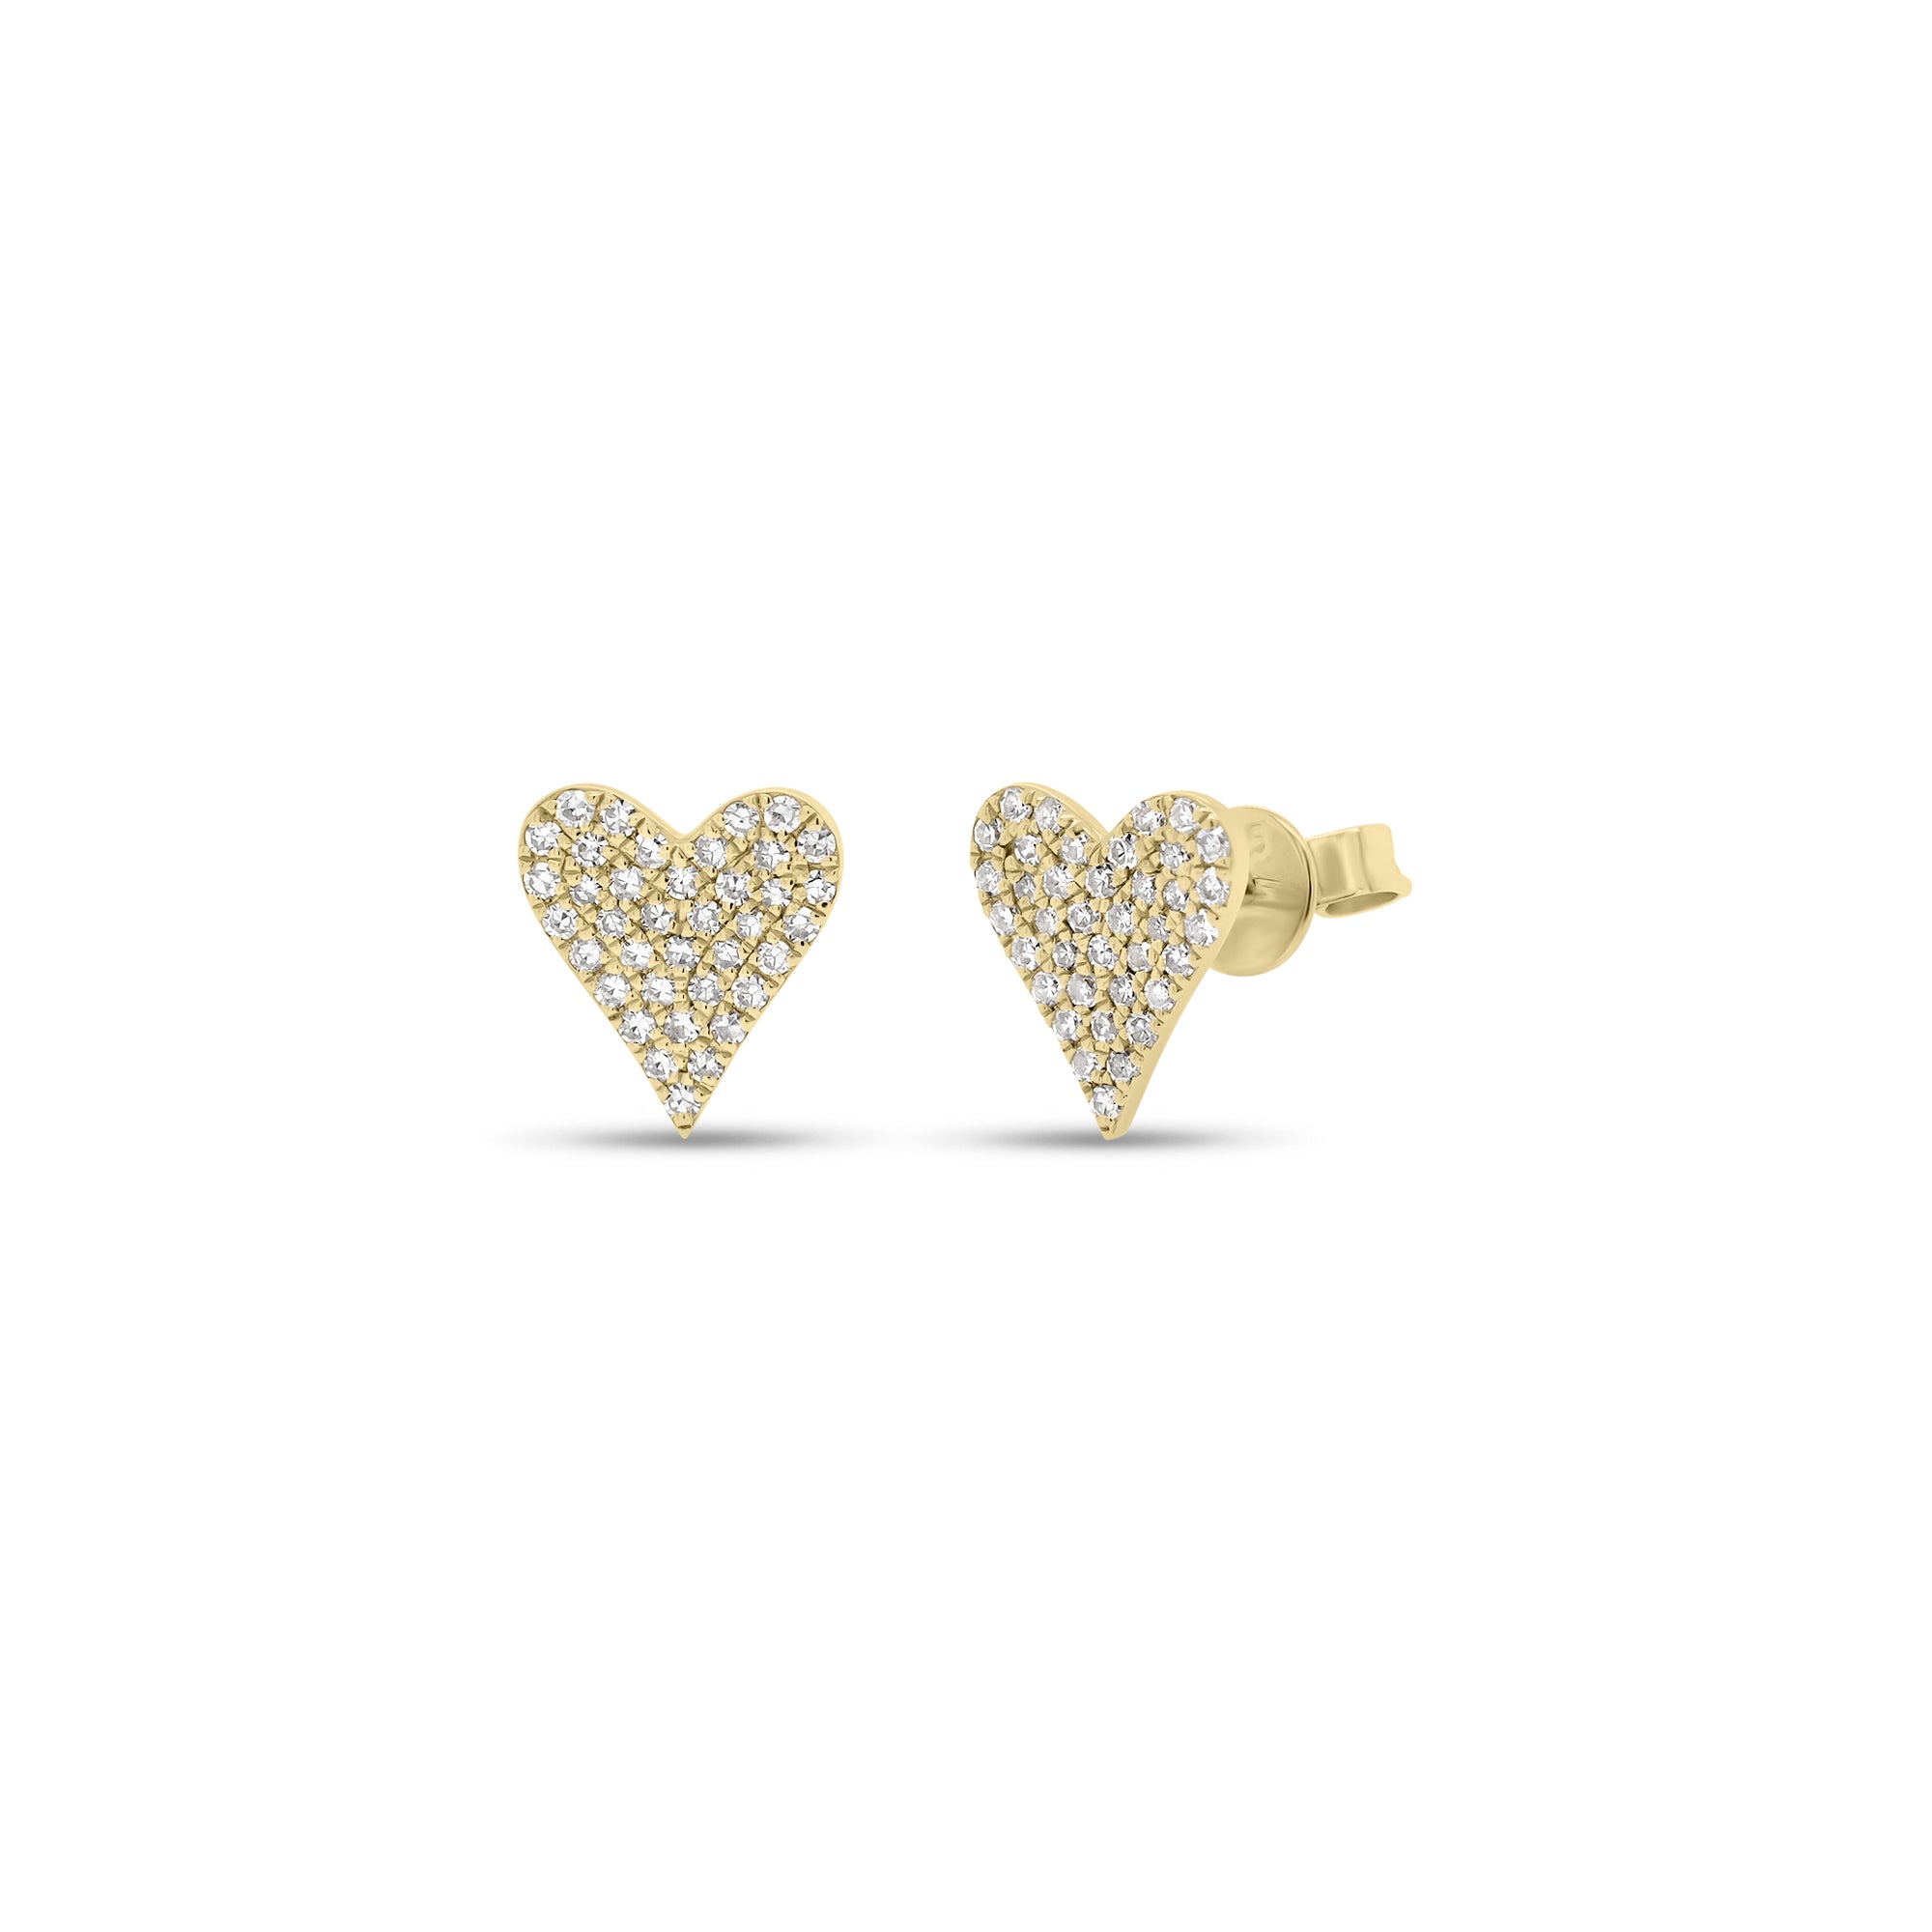 Pave Diamond Heart Stud Earrings - 14K yellow gold weighing 1.10 grams  - 76 round diamonds totaling 0.19 carats